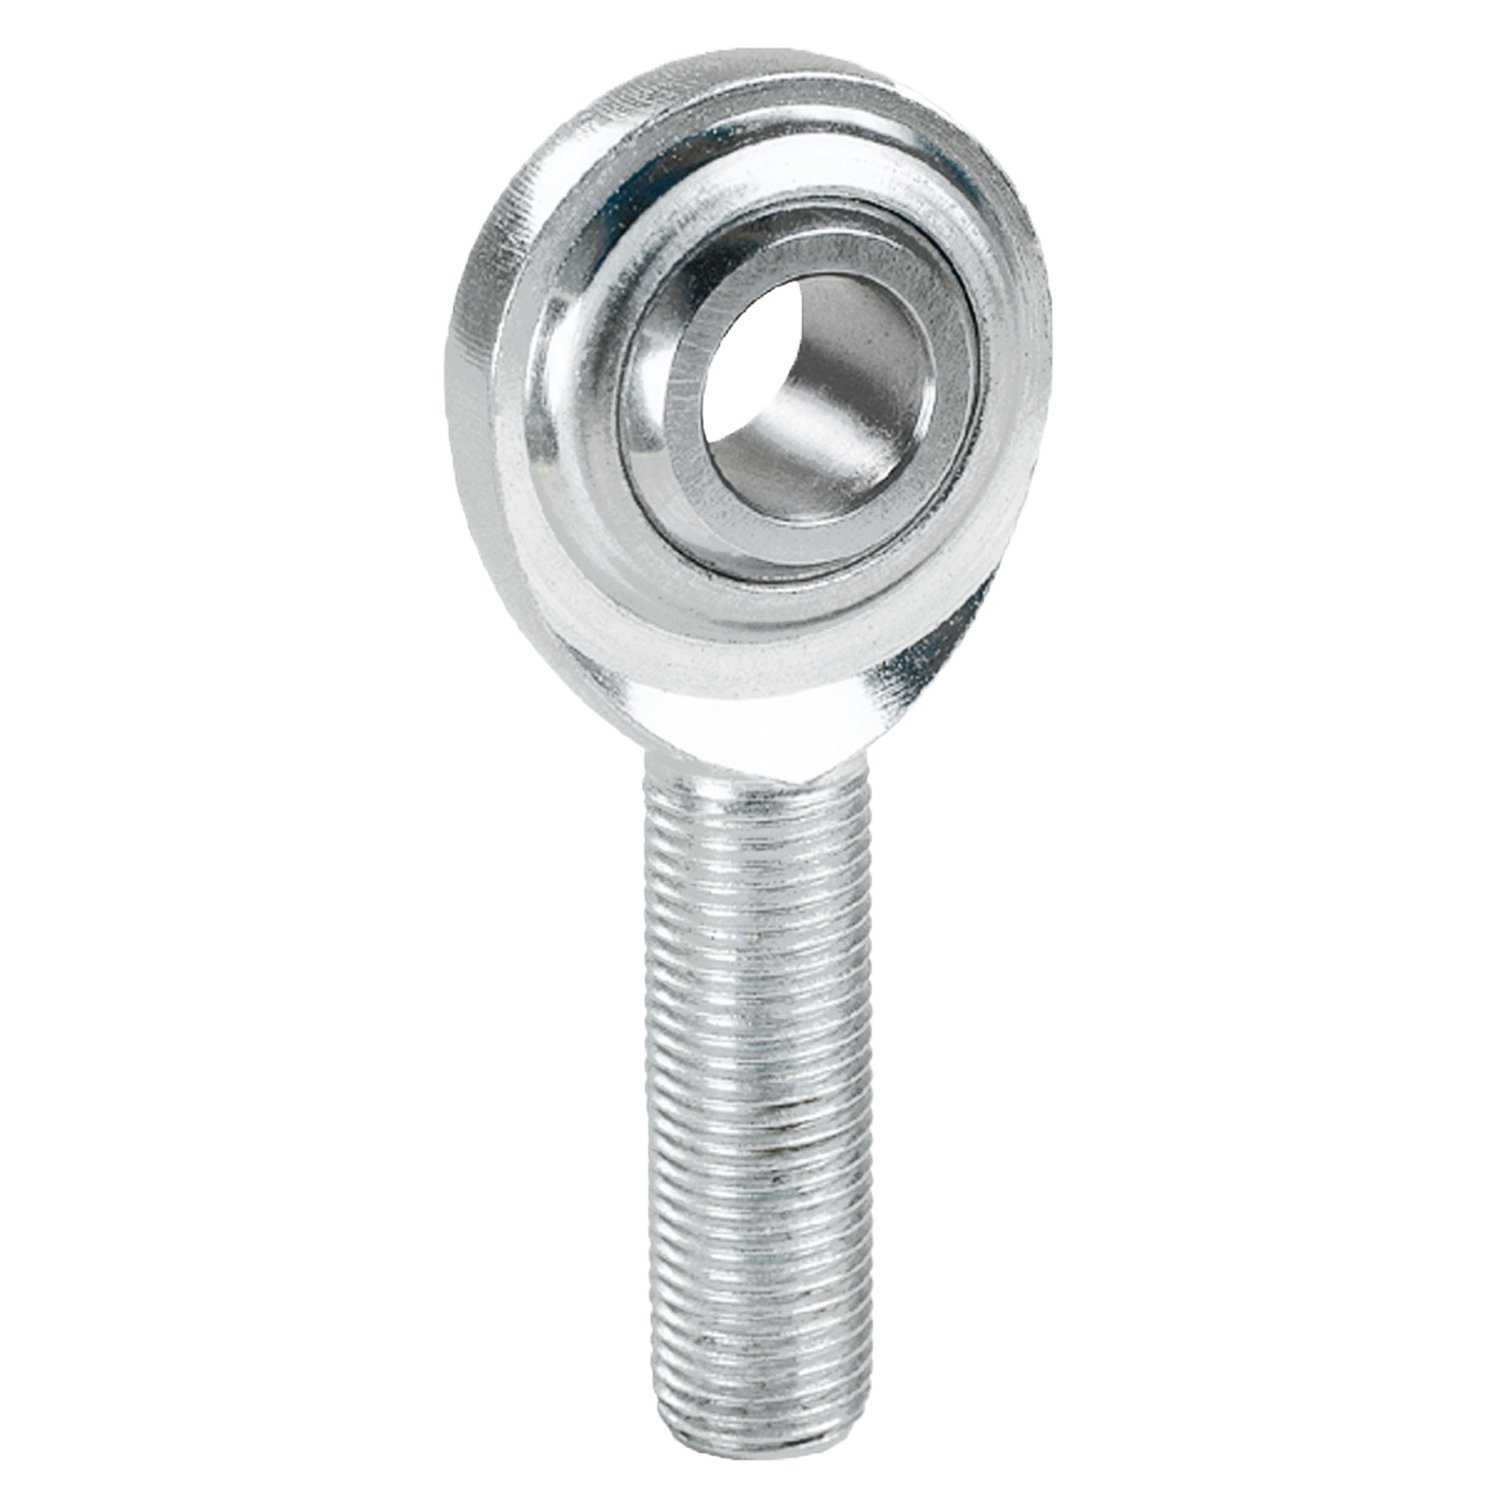 MGM-T Series Stainless Steel Rod End Hole I.D.: 14 mm